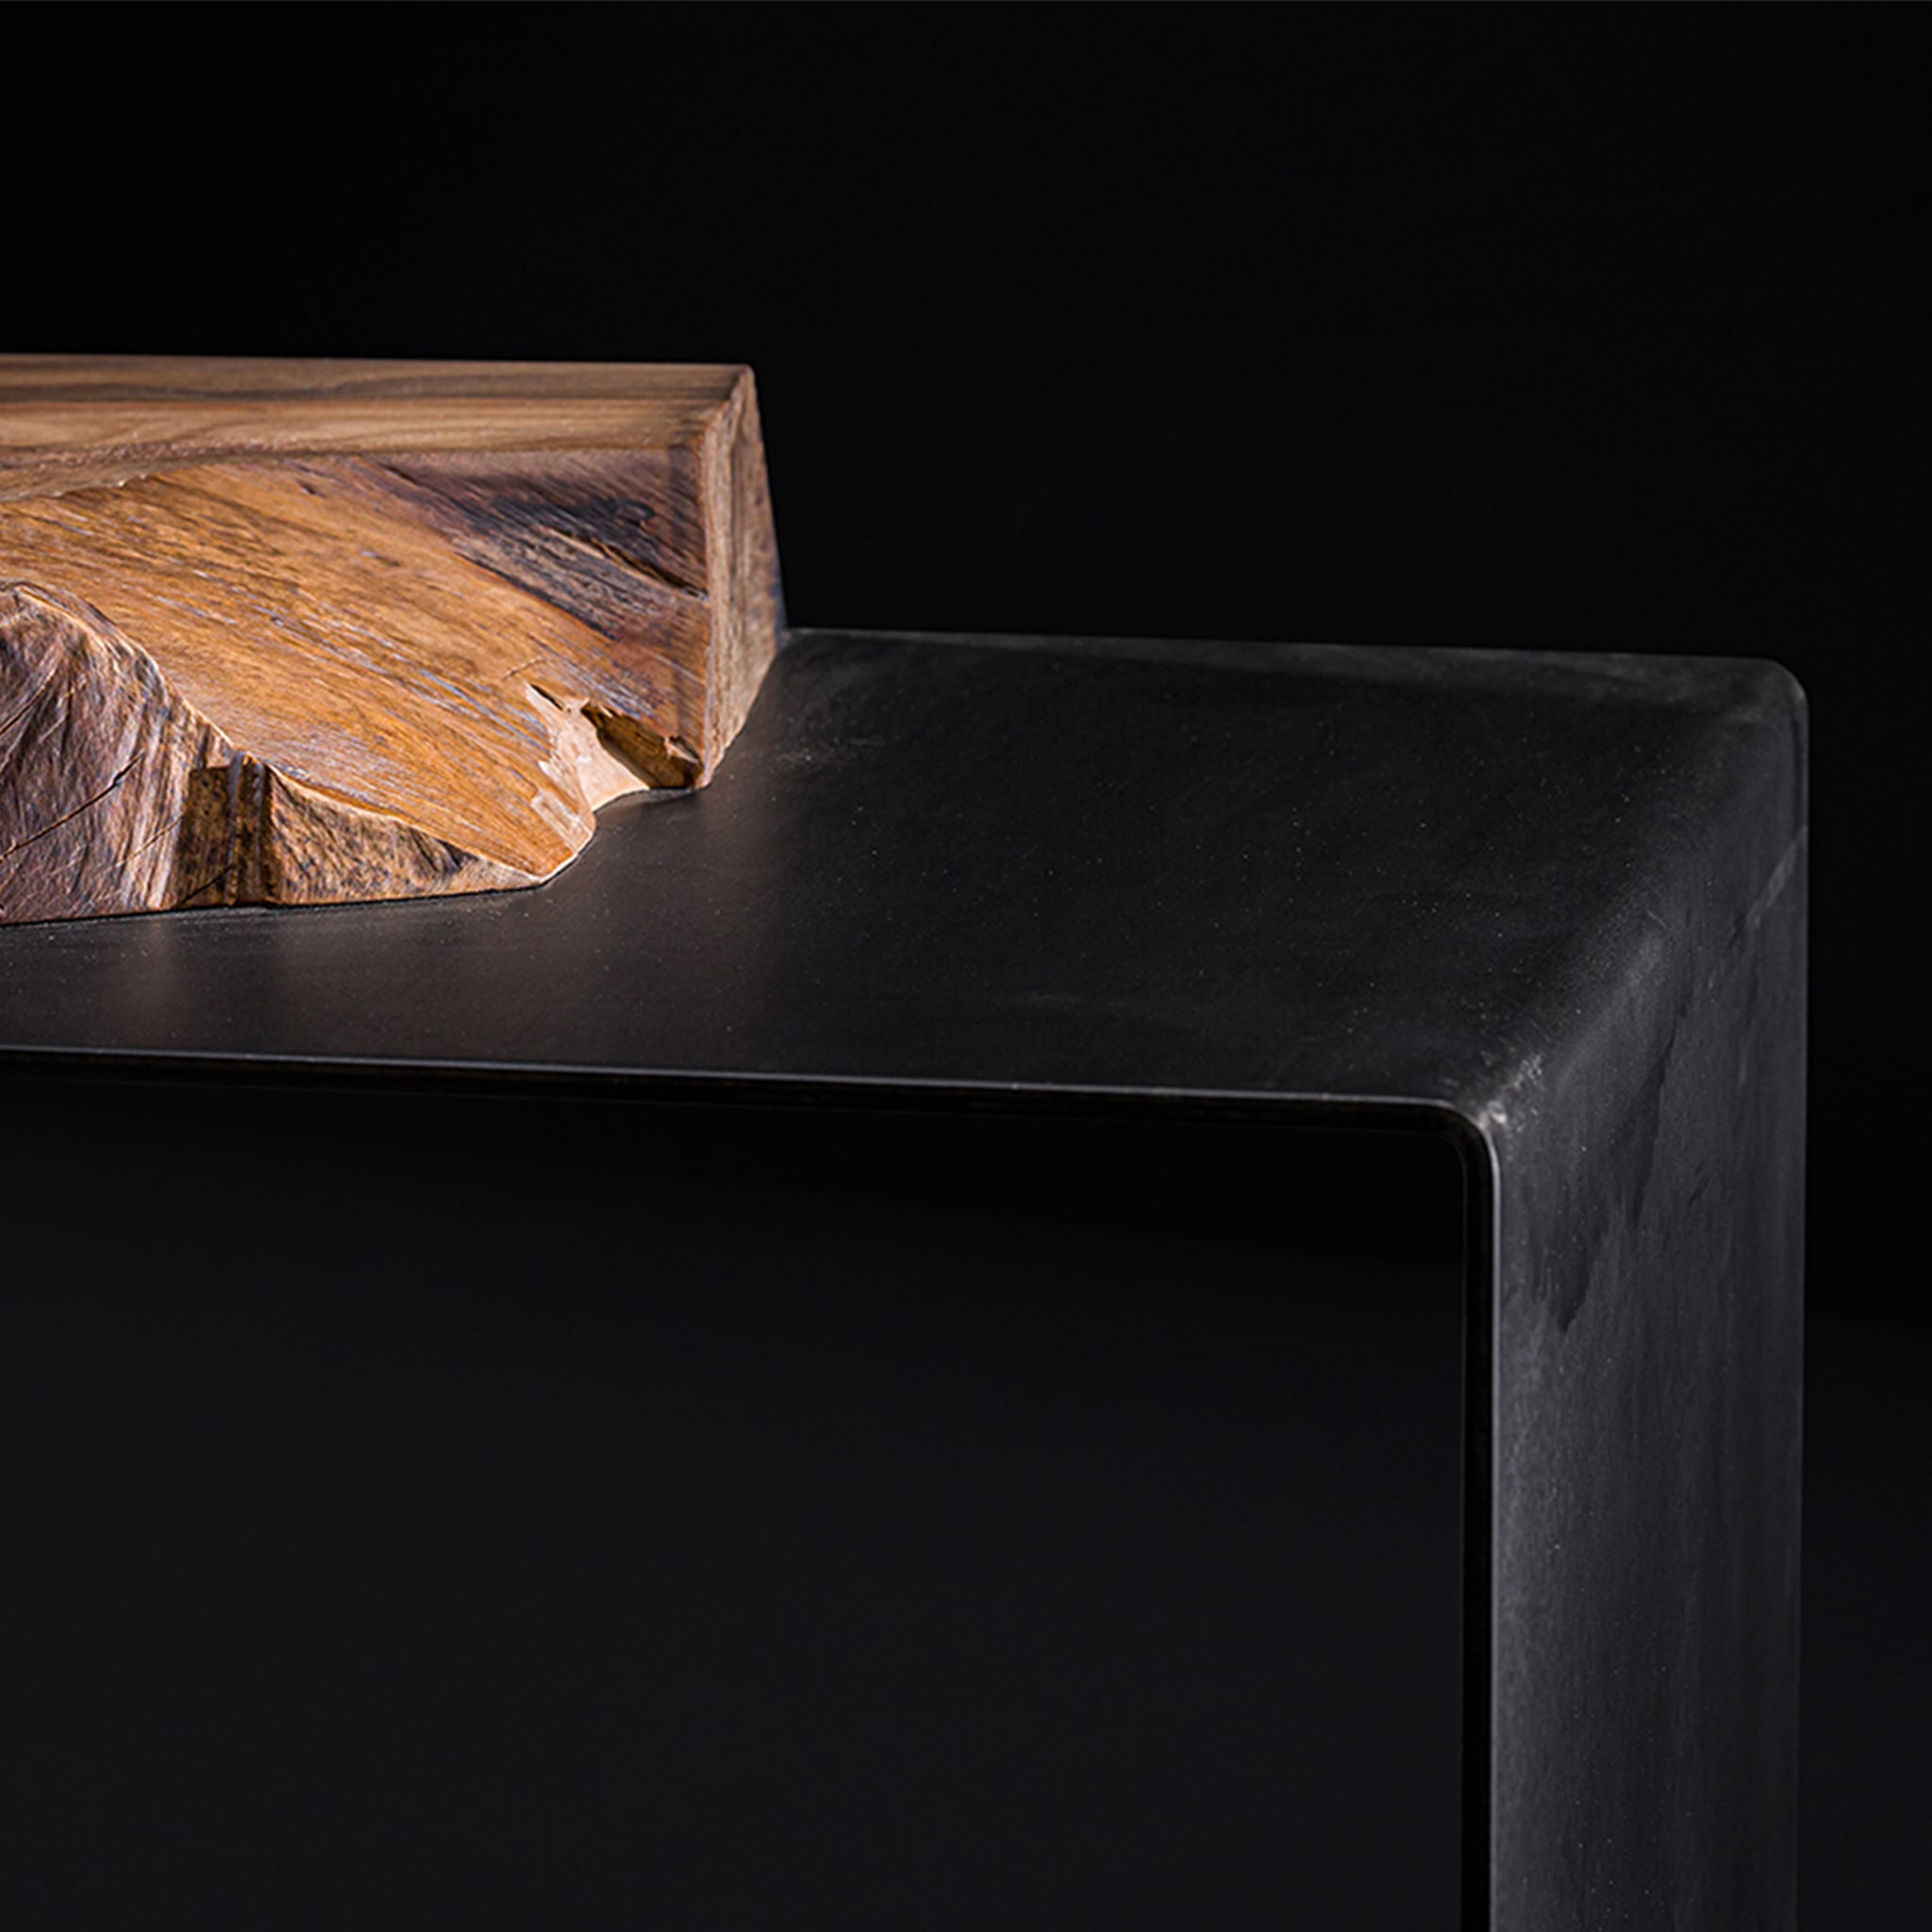 Walnut and steel side table - Alternative view 1